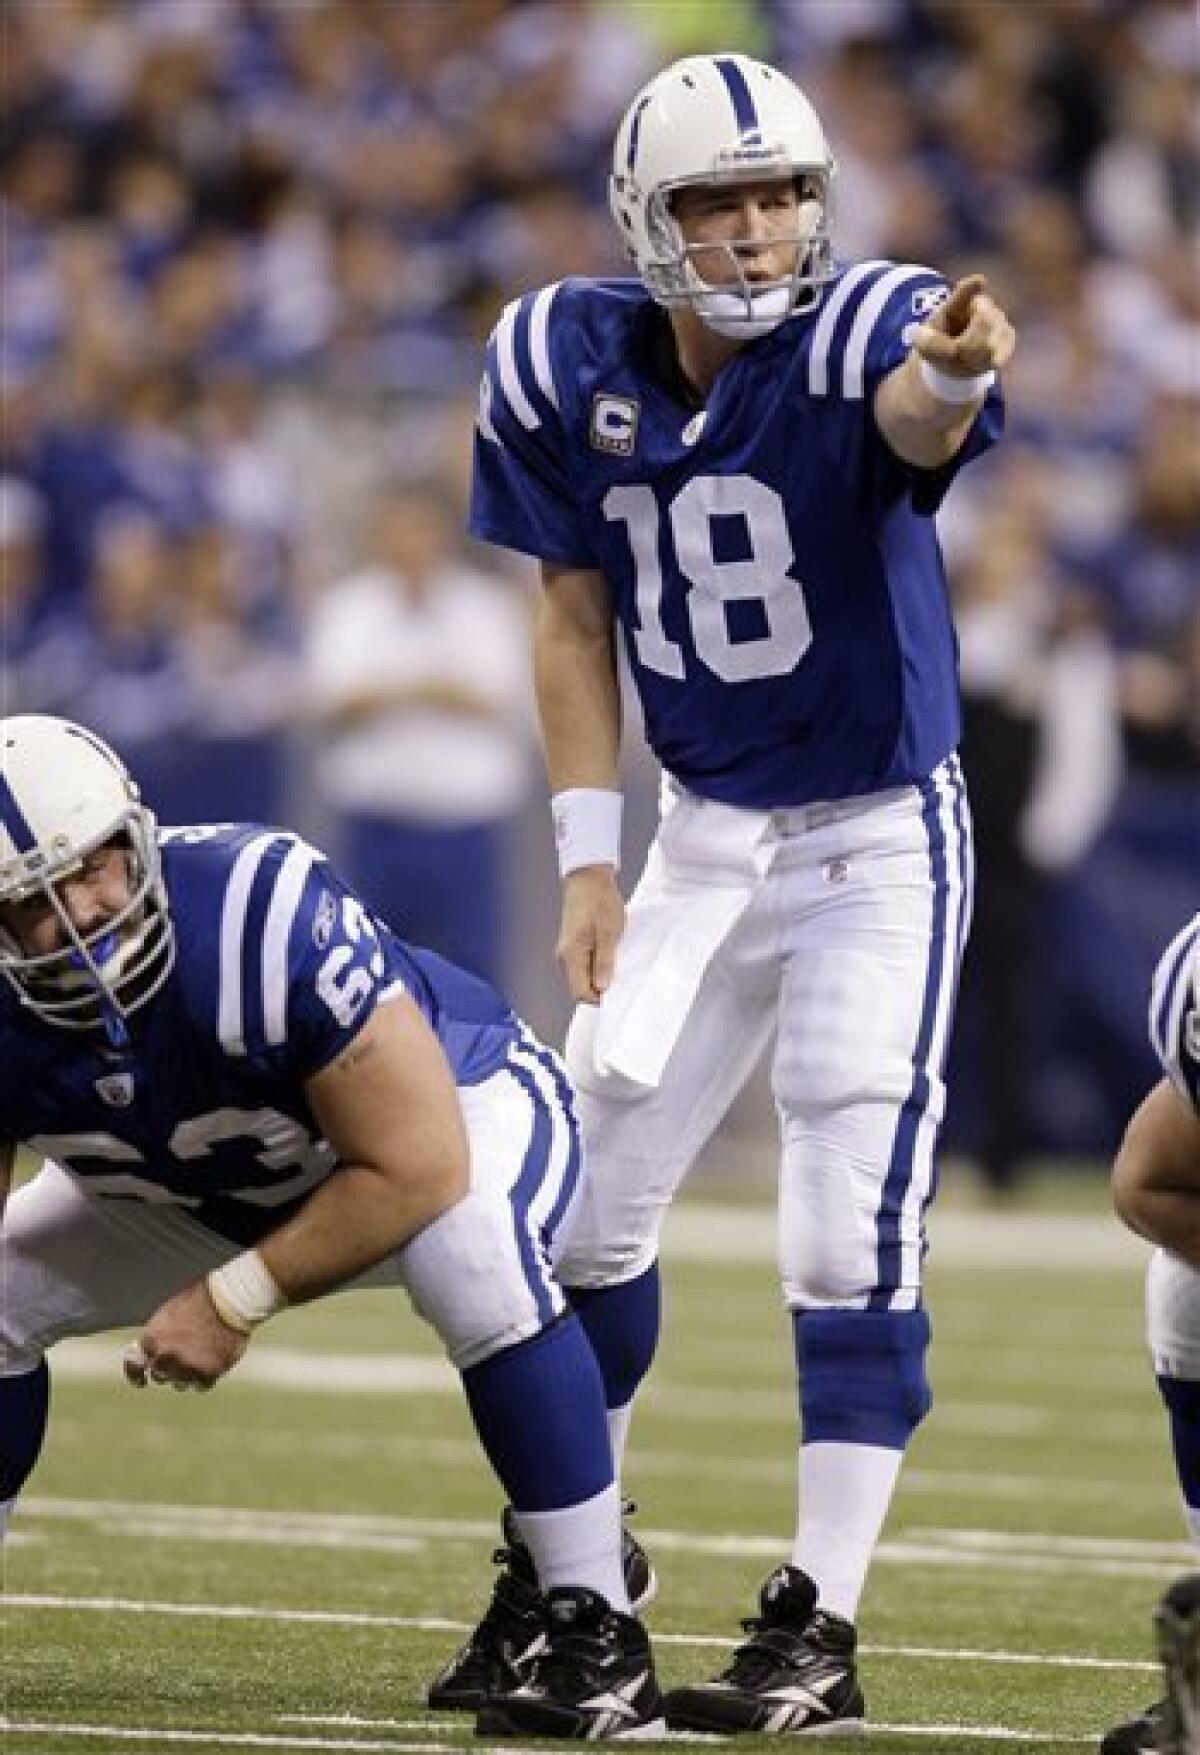 NFL FILE: Peyton Manning (18) of the Indianapolis Colts and Ryan